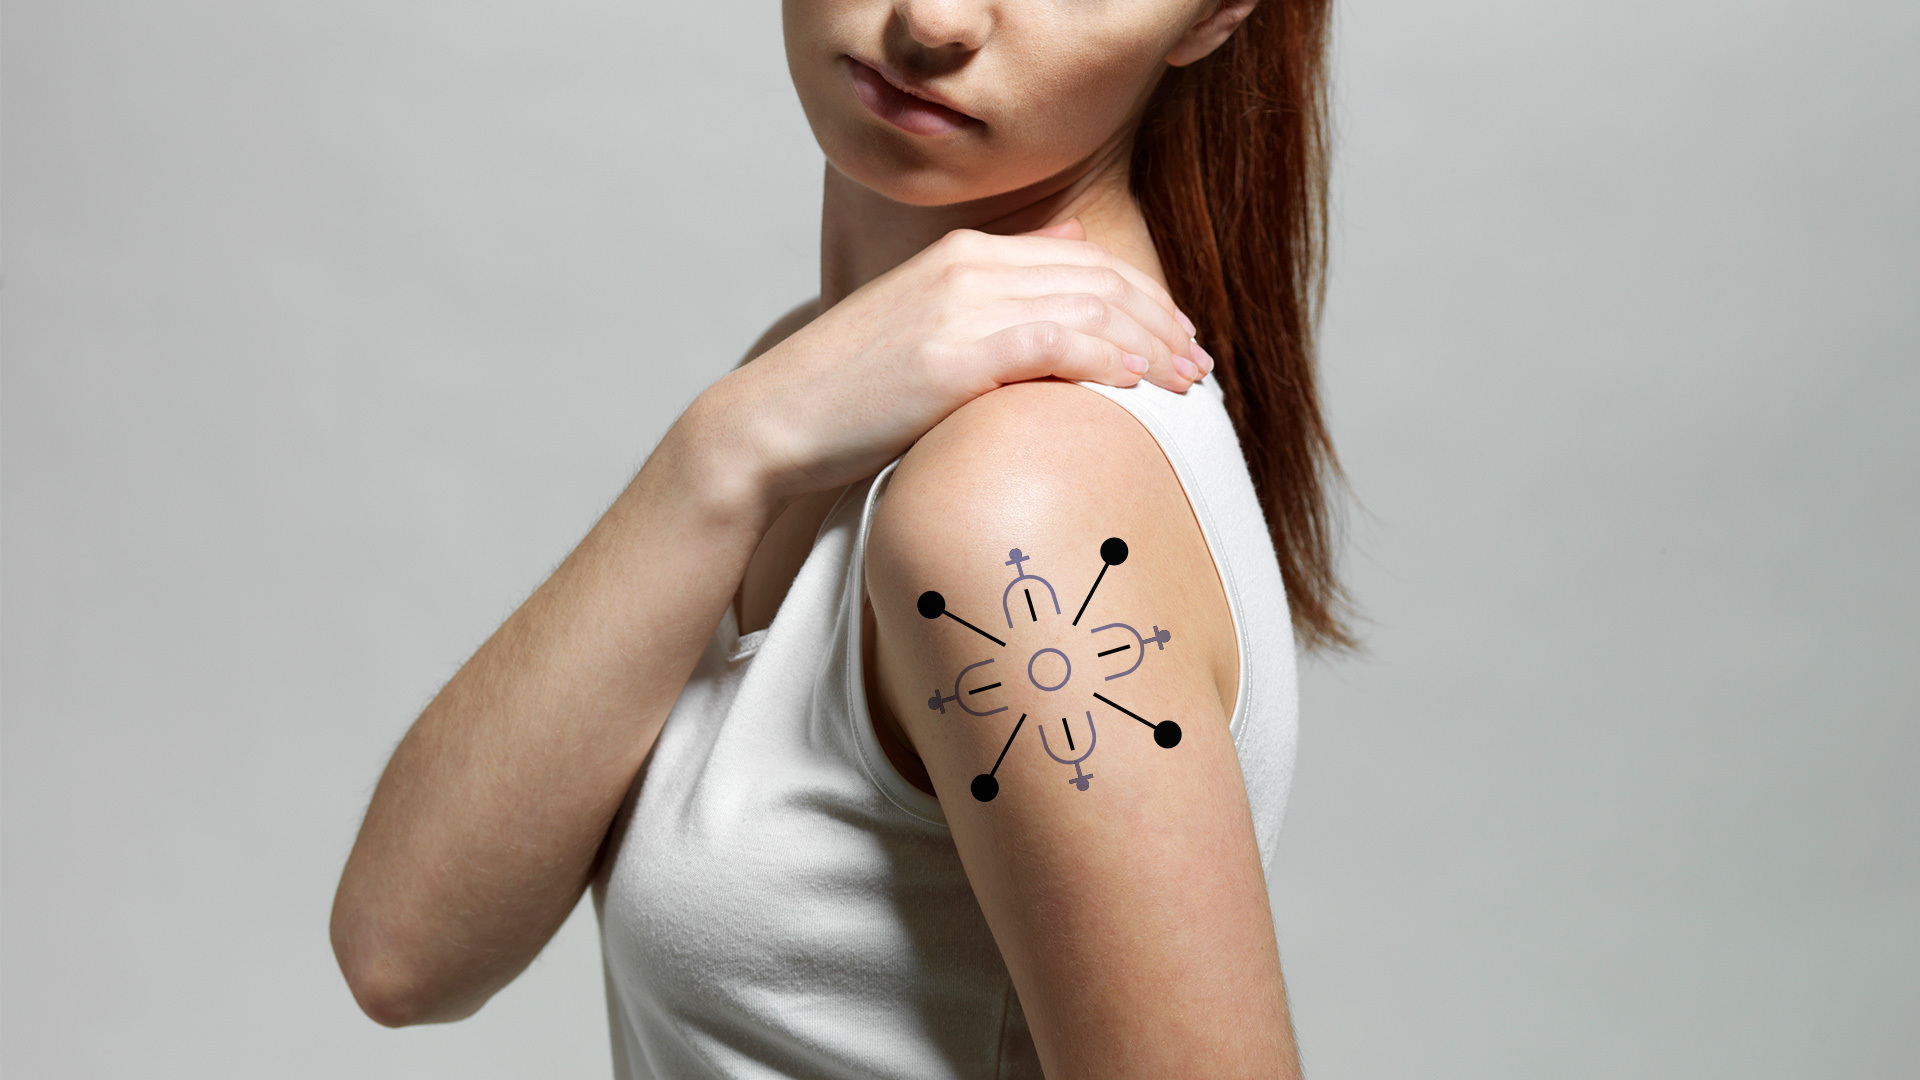 Researchers at MIT and Harvard Medical School are exploring the possibility of a biosensor tattoo that can make a person's skin interactive.